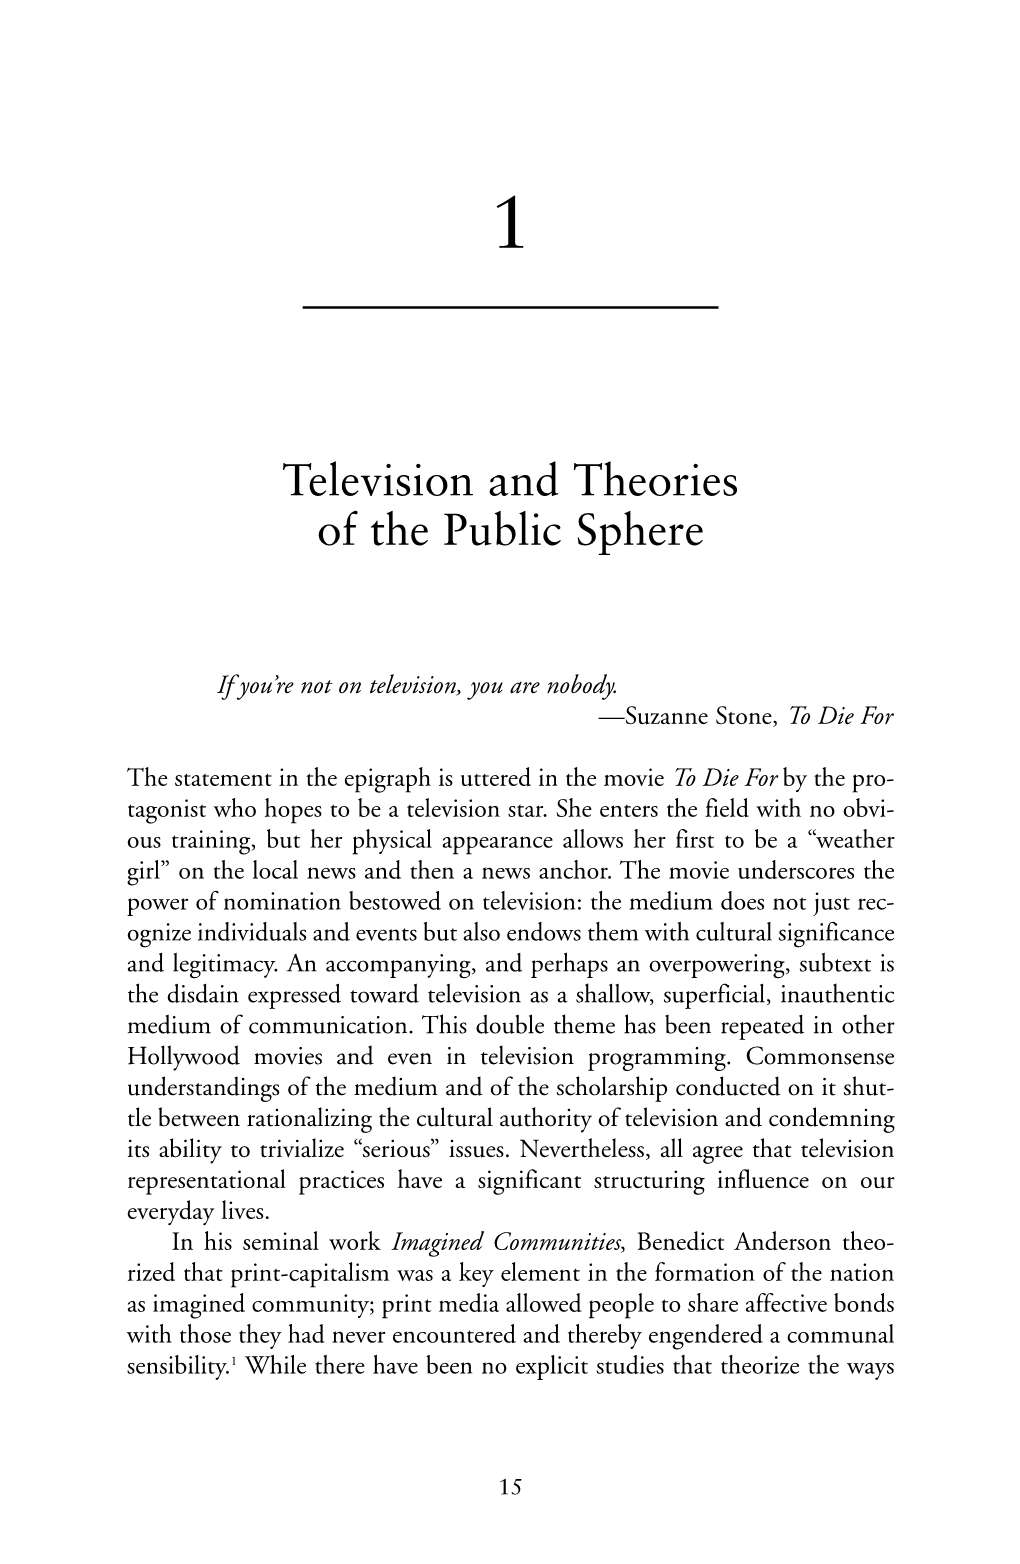 Television and Theories of the Public Sphere